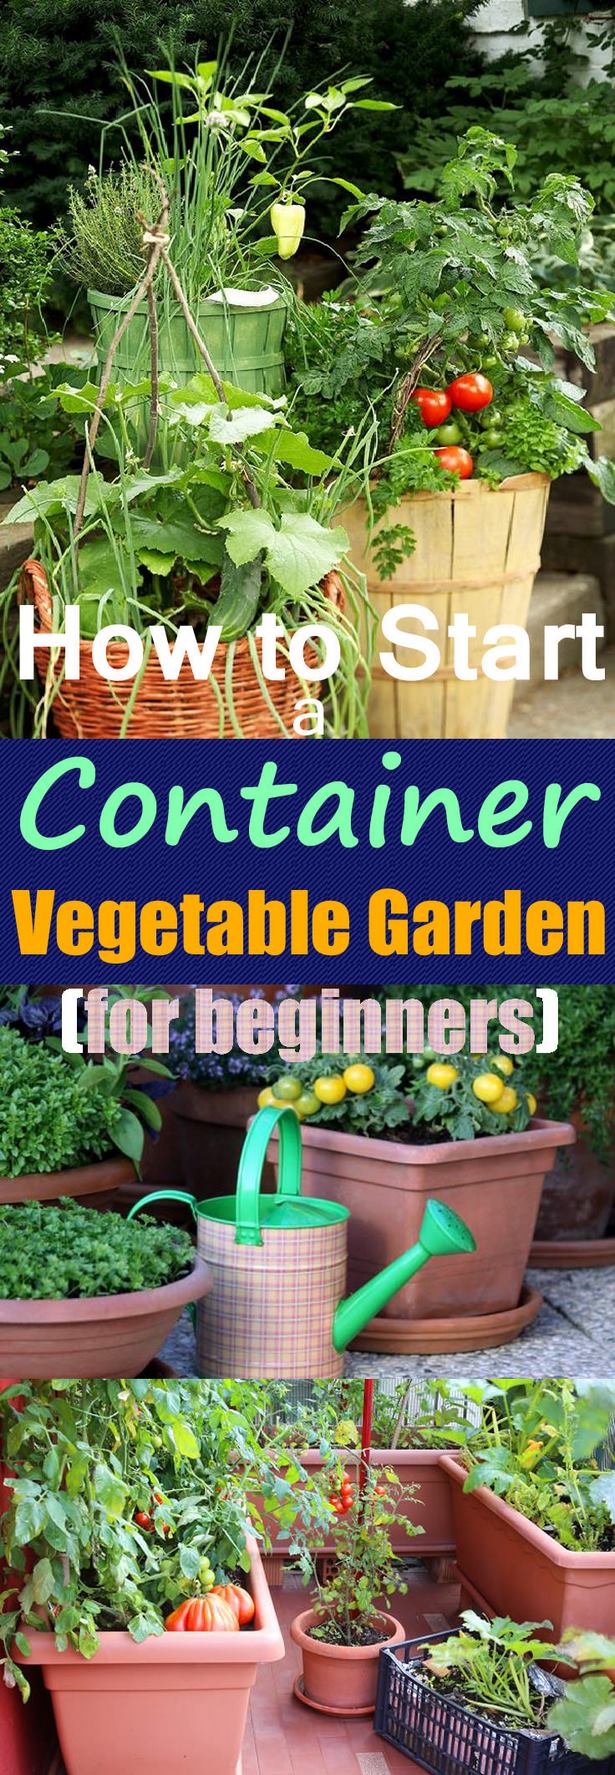 container-gardening-ideas-for-beginners-61_12 Контейнер градинарство идеи за начинаещи